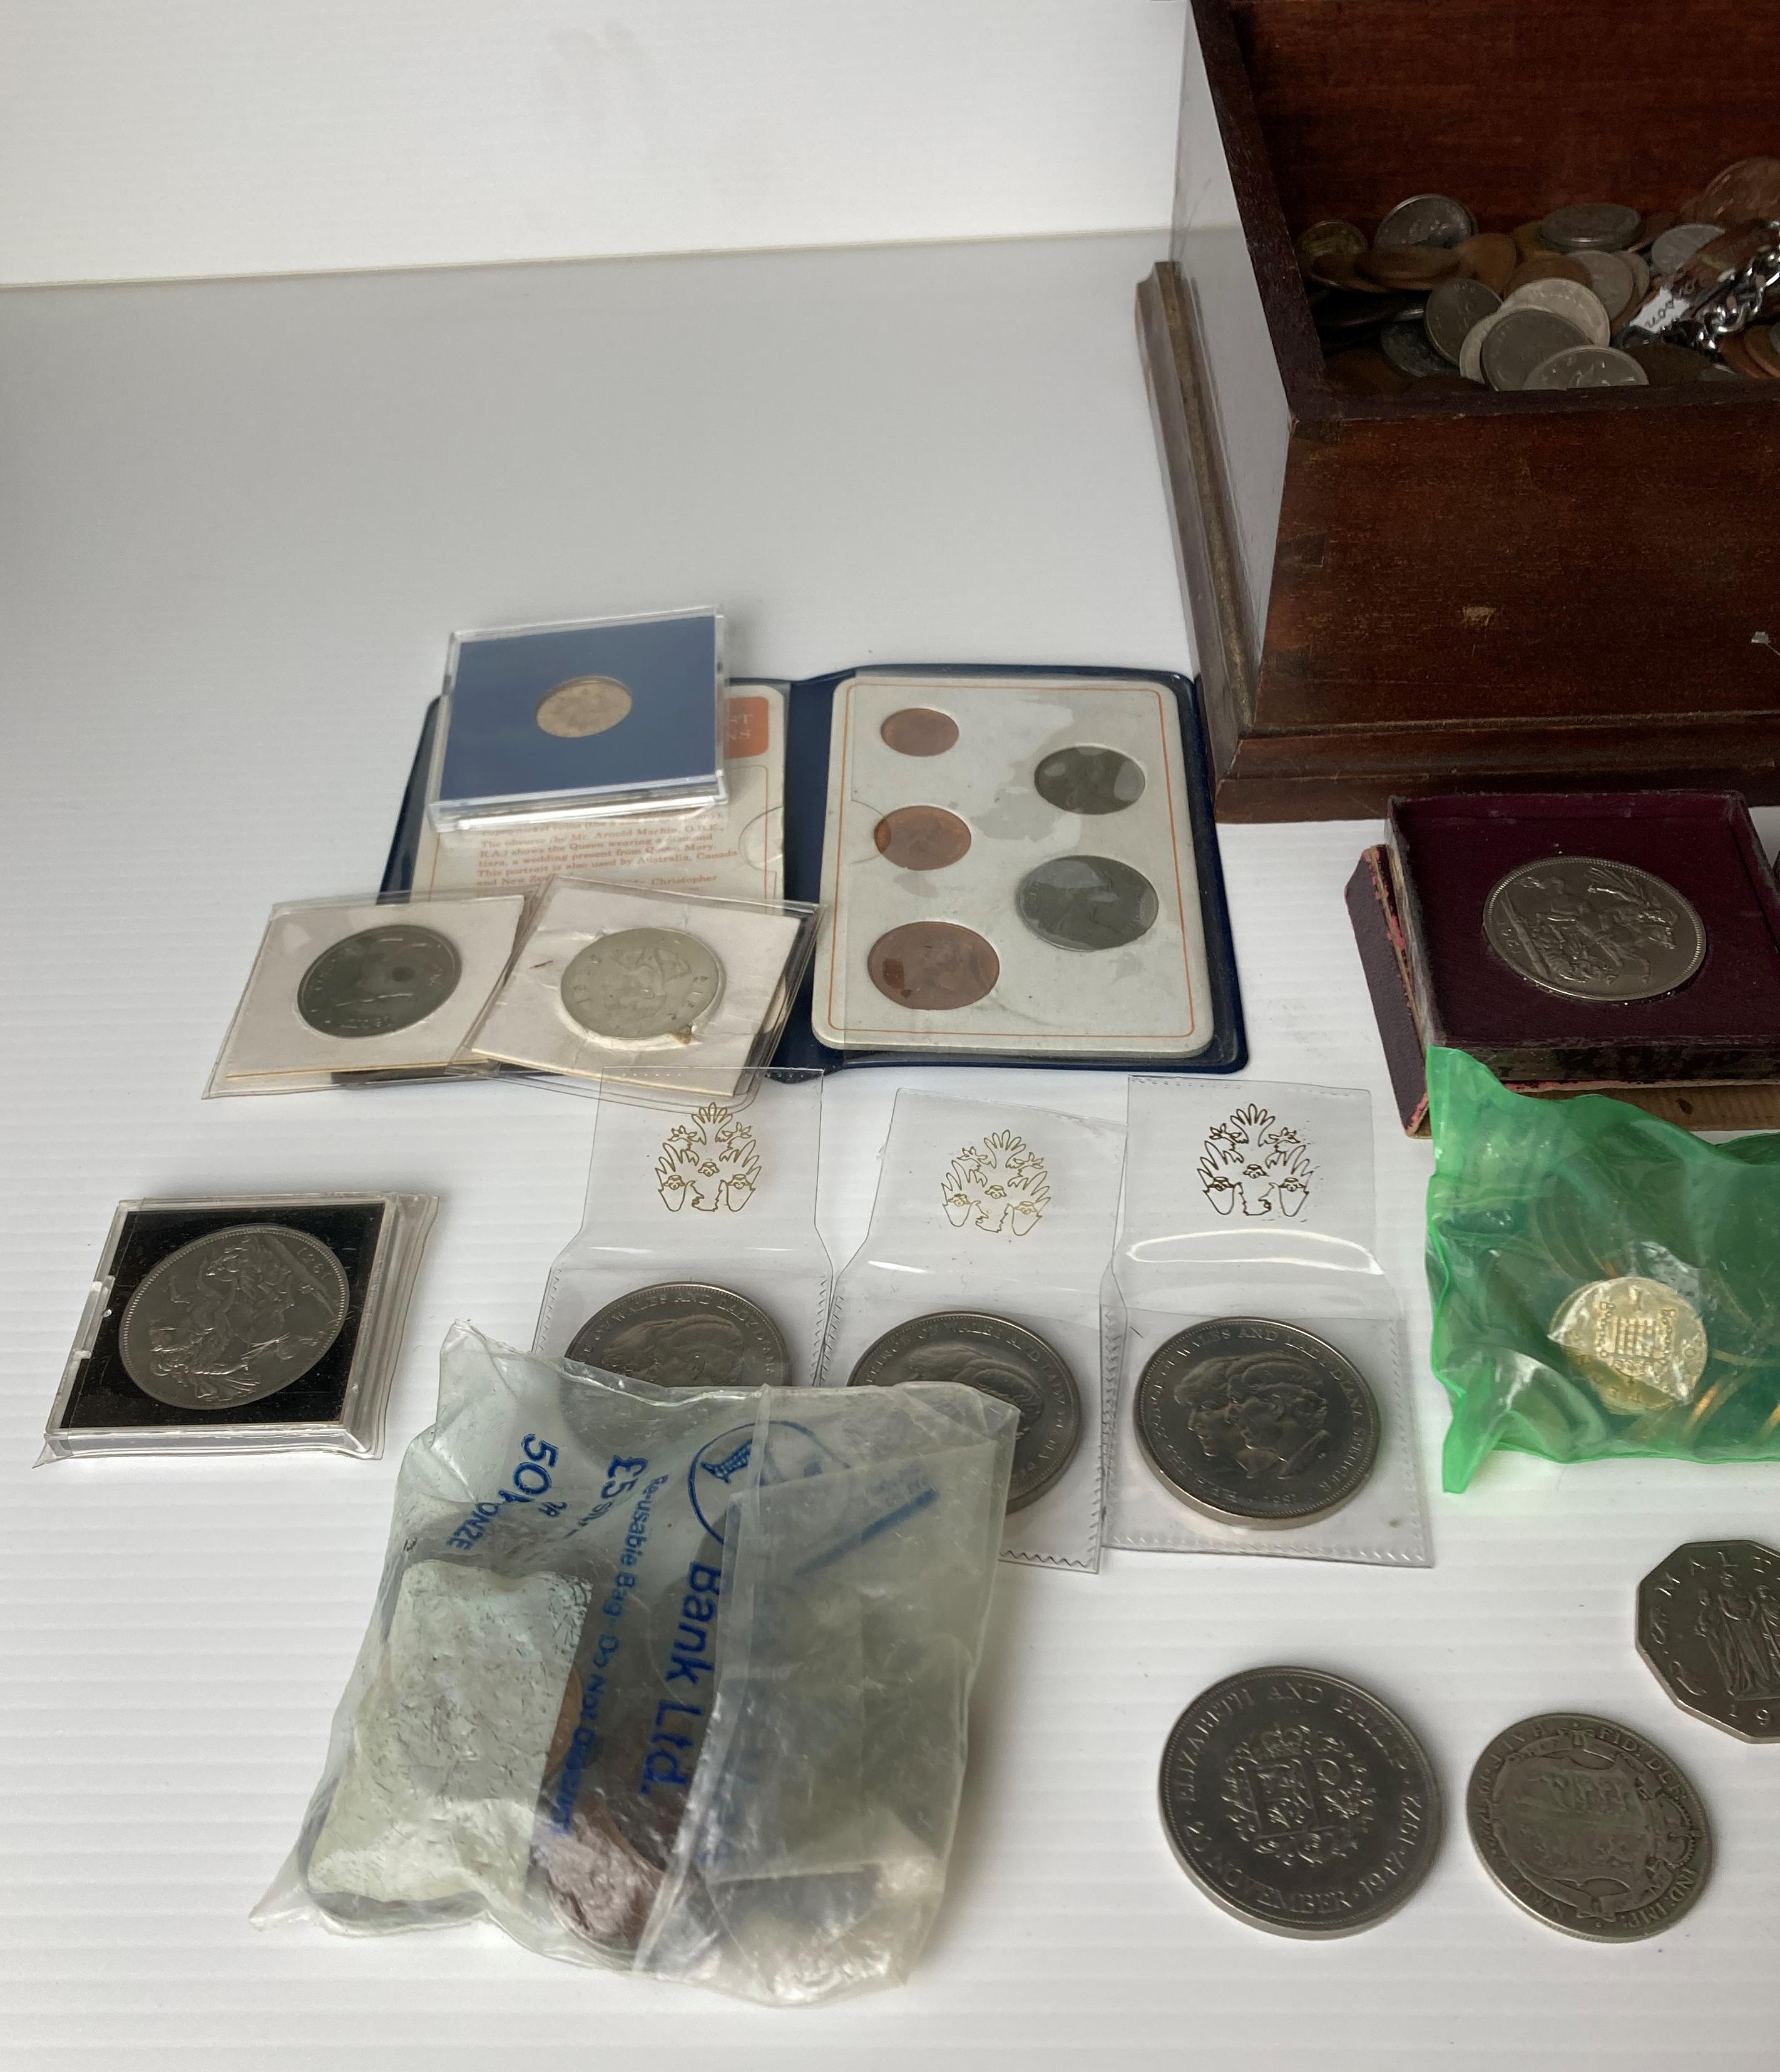 Mahogany jewellery box and large quantity of assorted coins including Silver Half-Crowns (1915), - Image 3 of 4